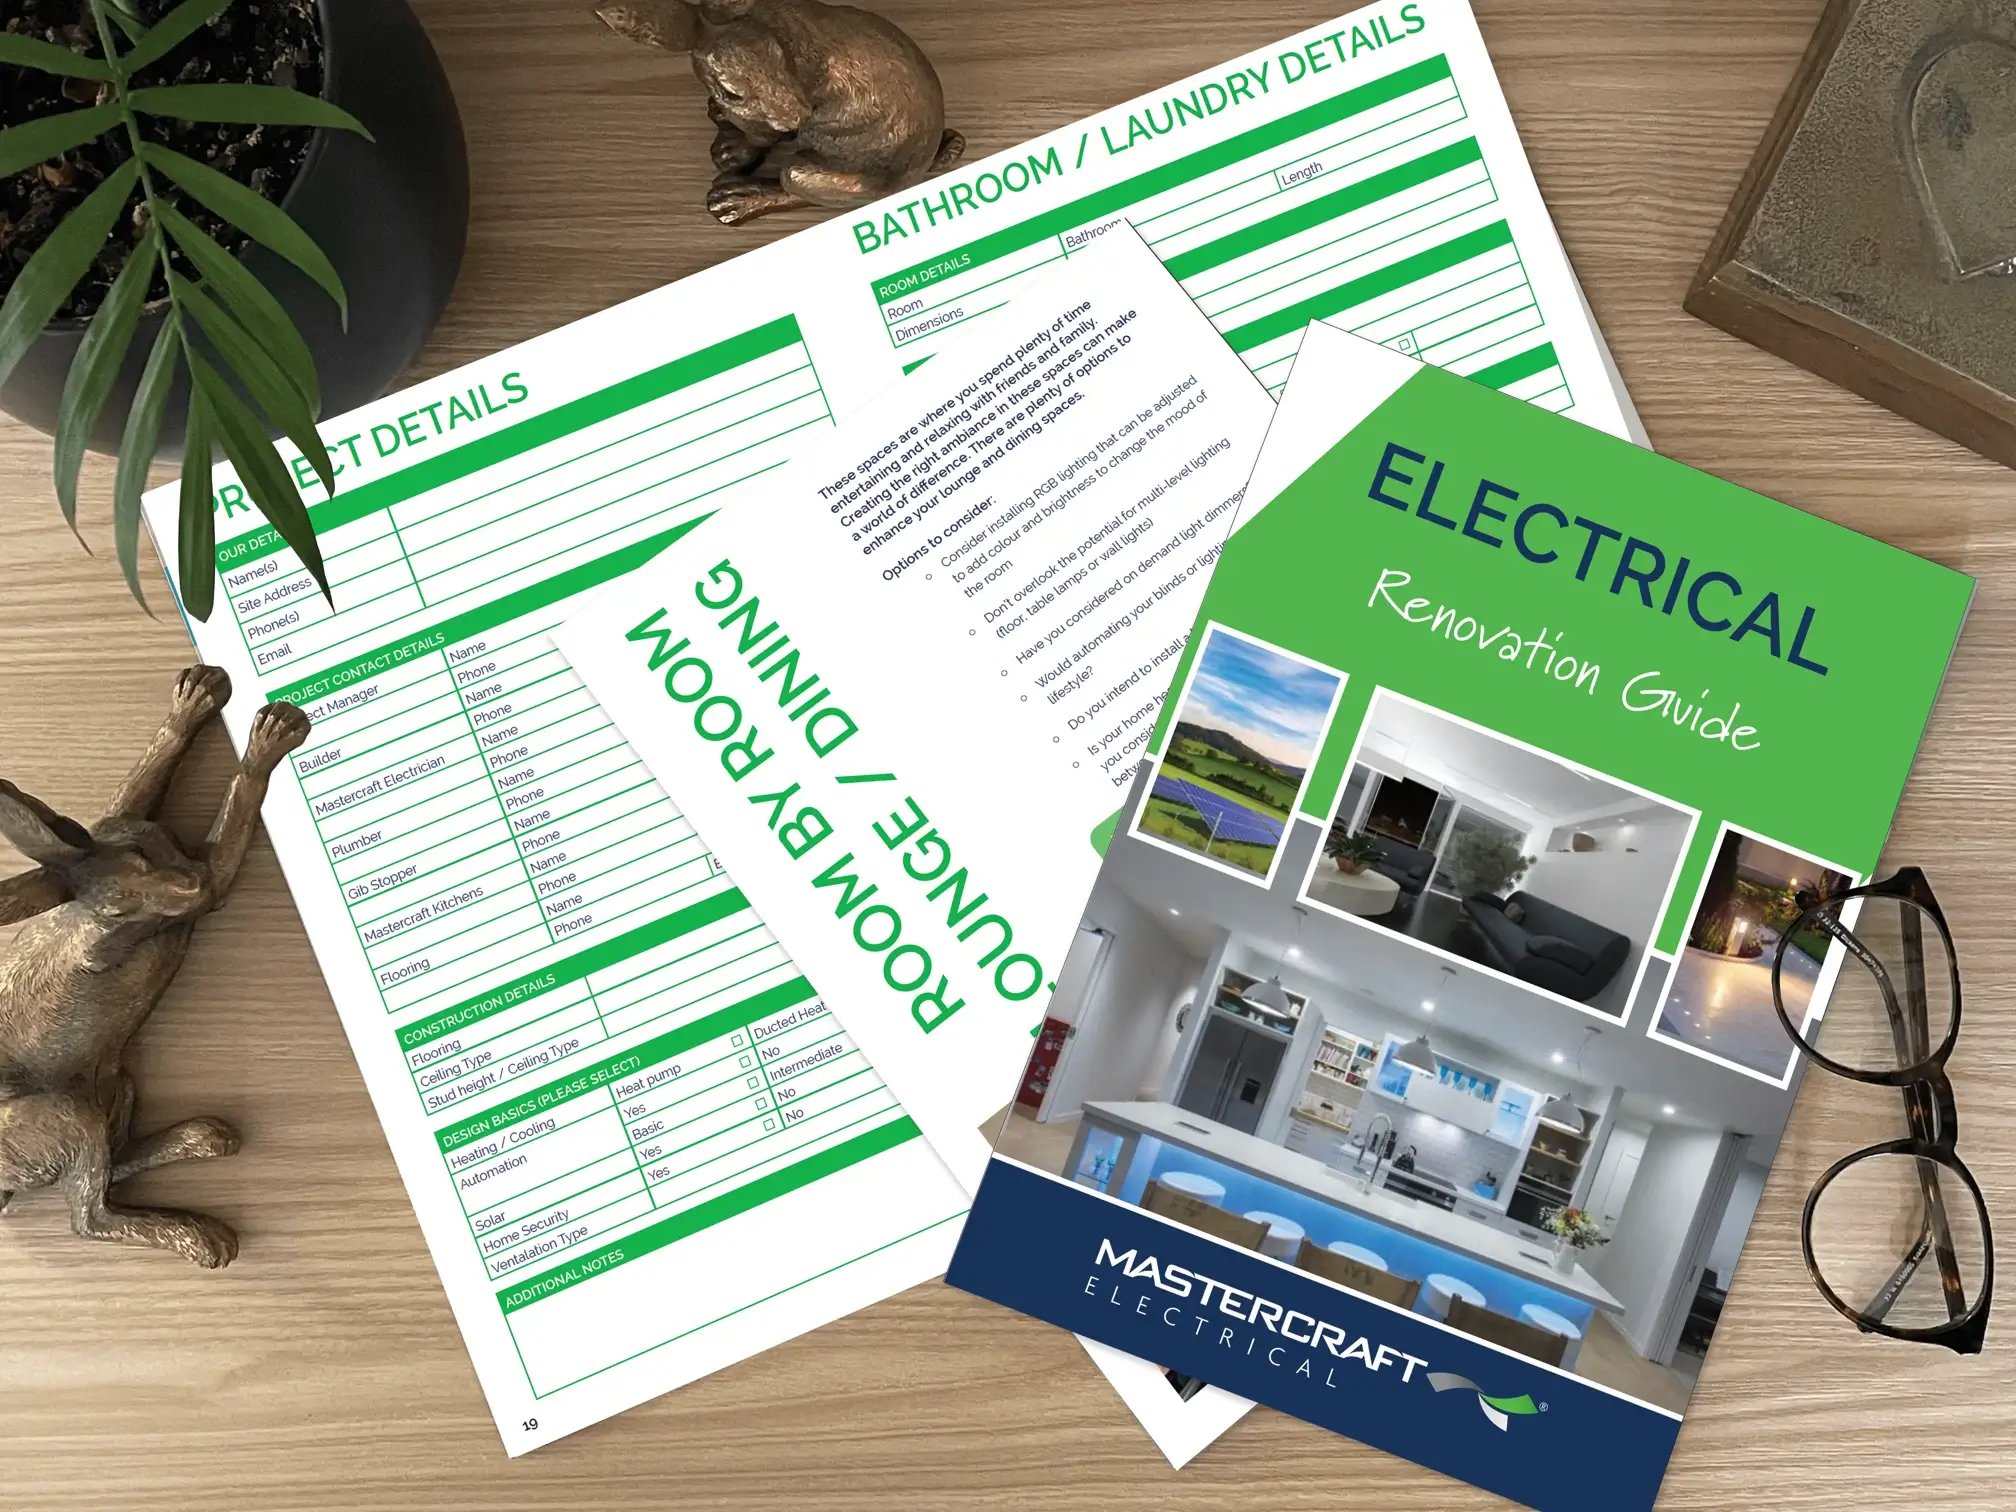 Download our Electrical Reno Guide